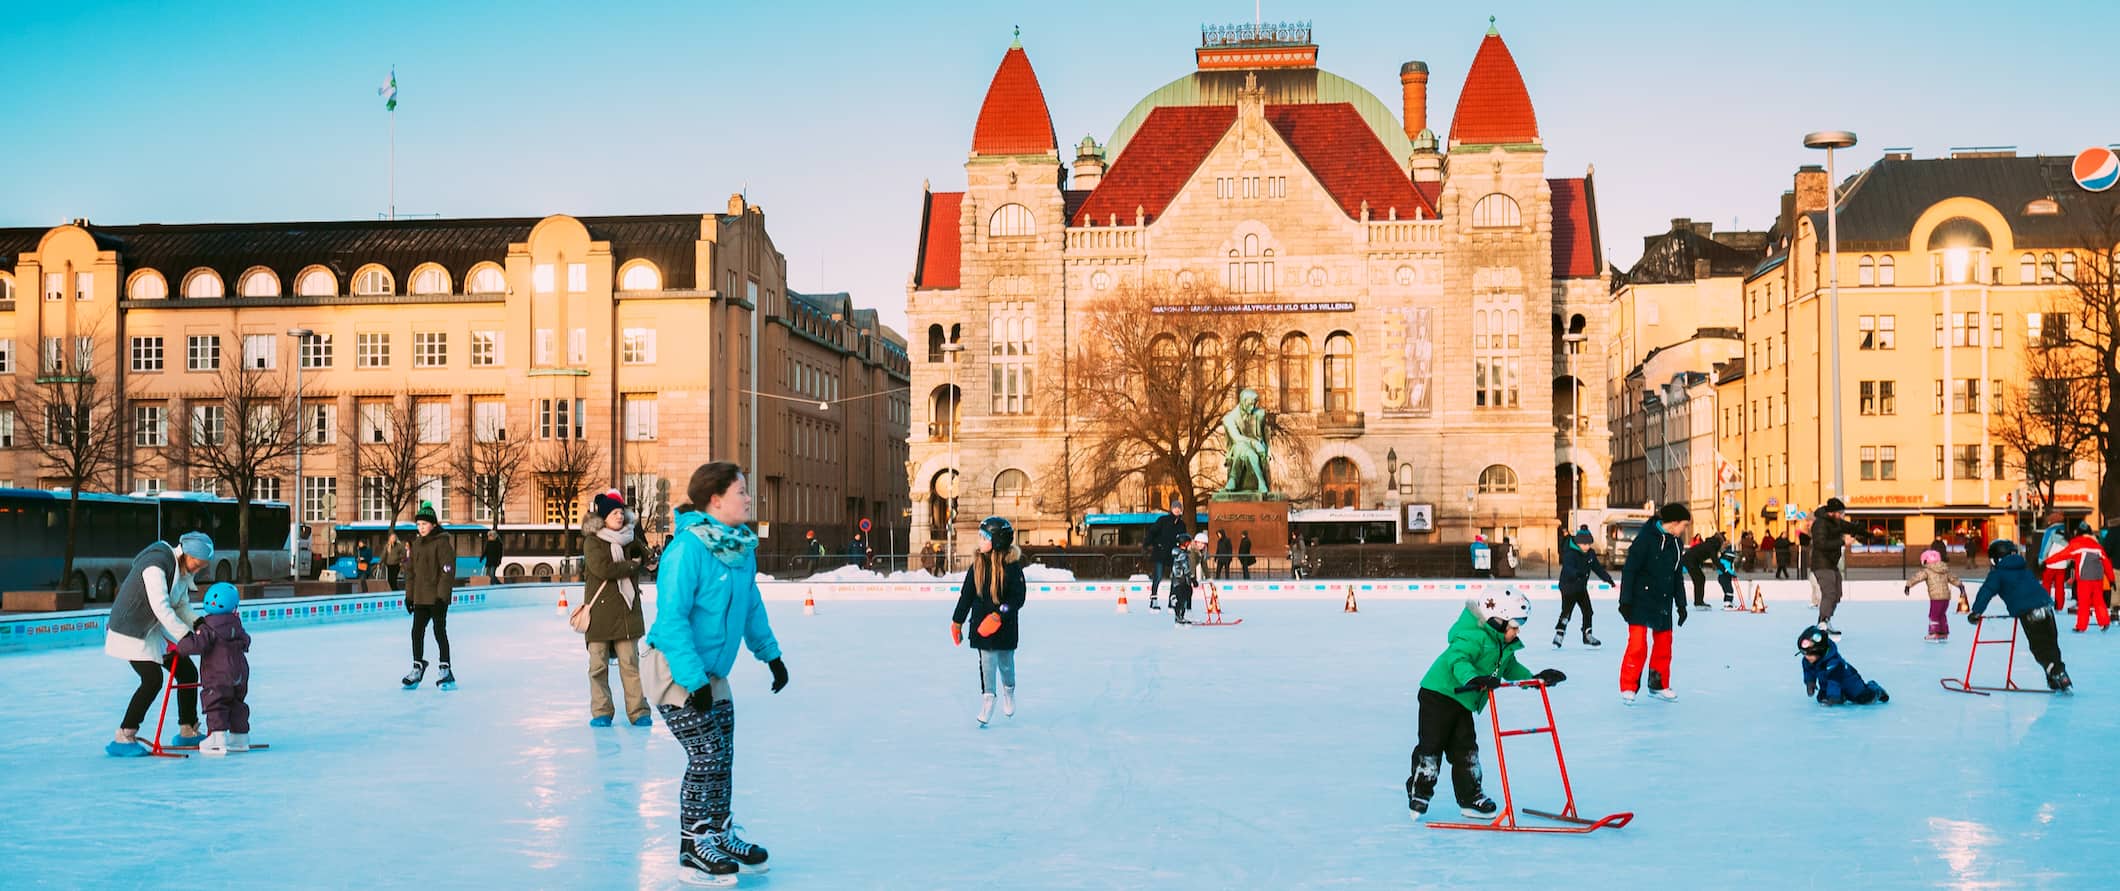 People skating and enjoying the snowy weather in beautiful Helsinki, Finland